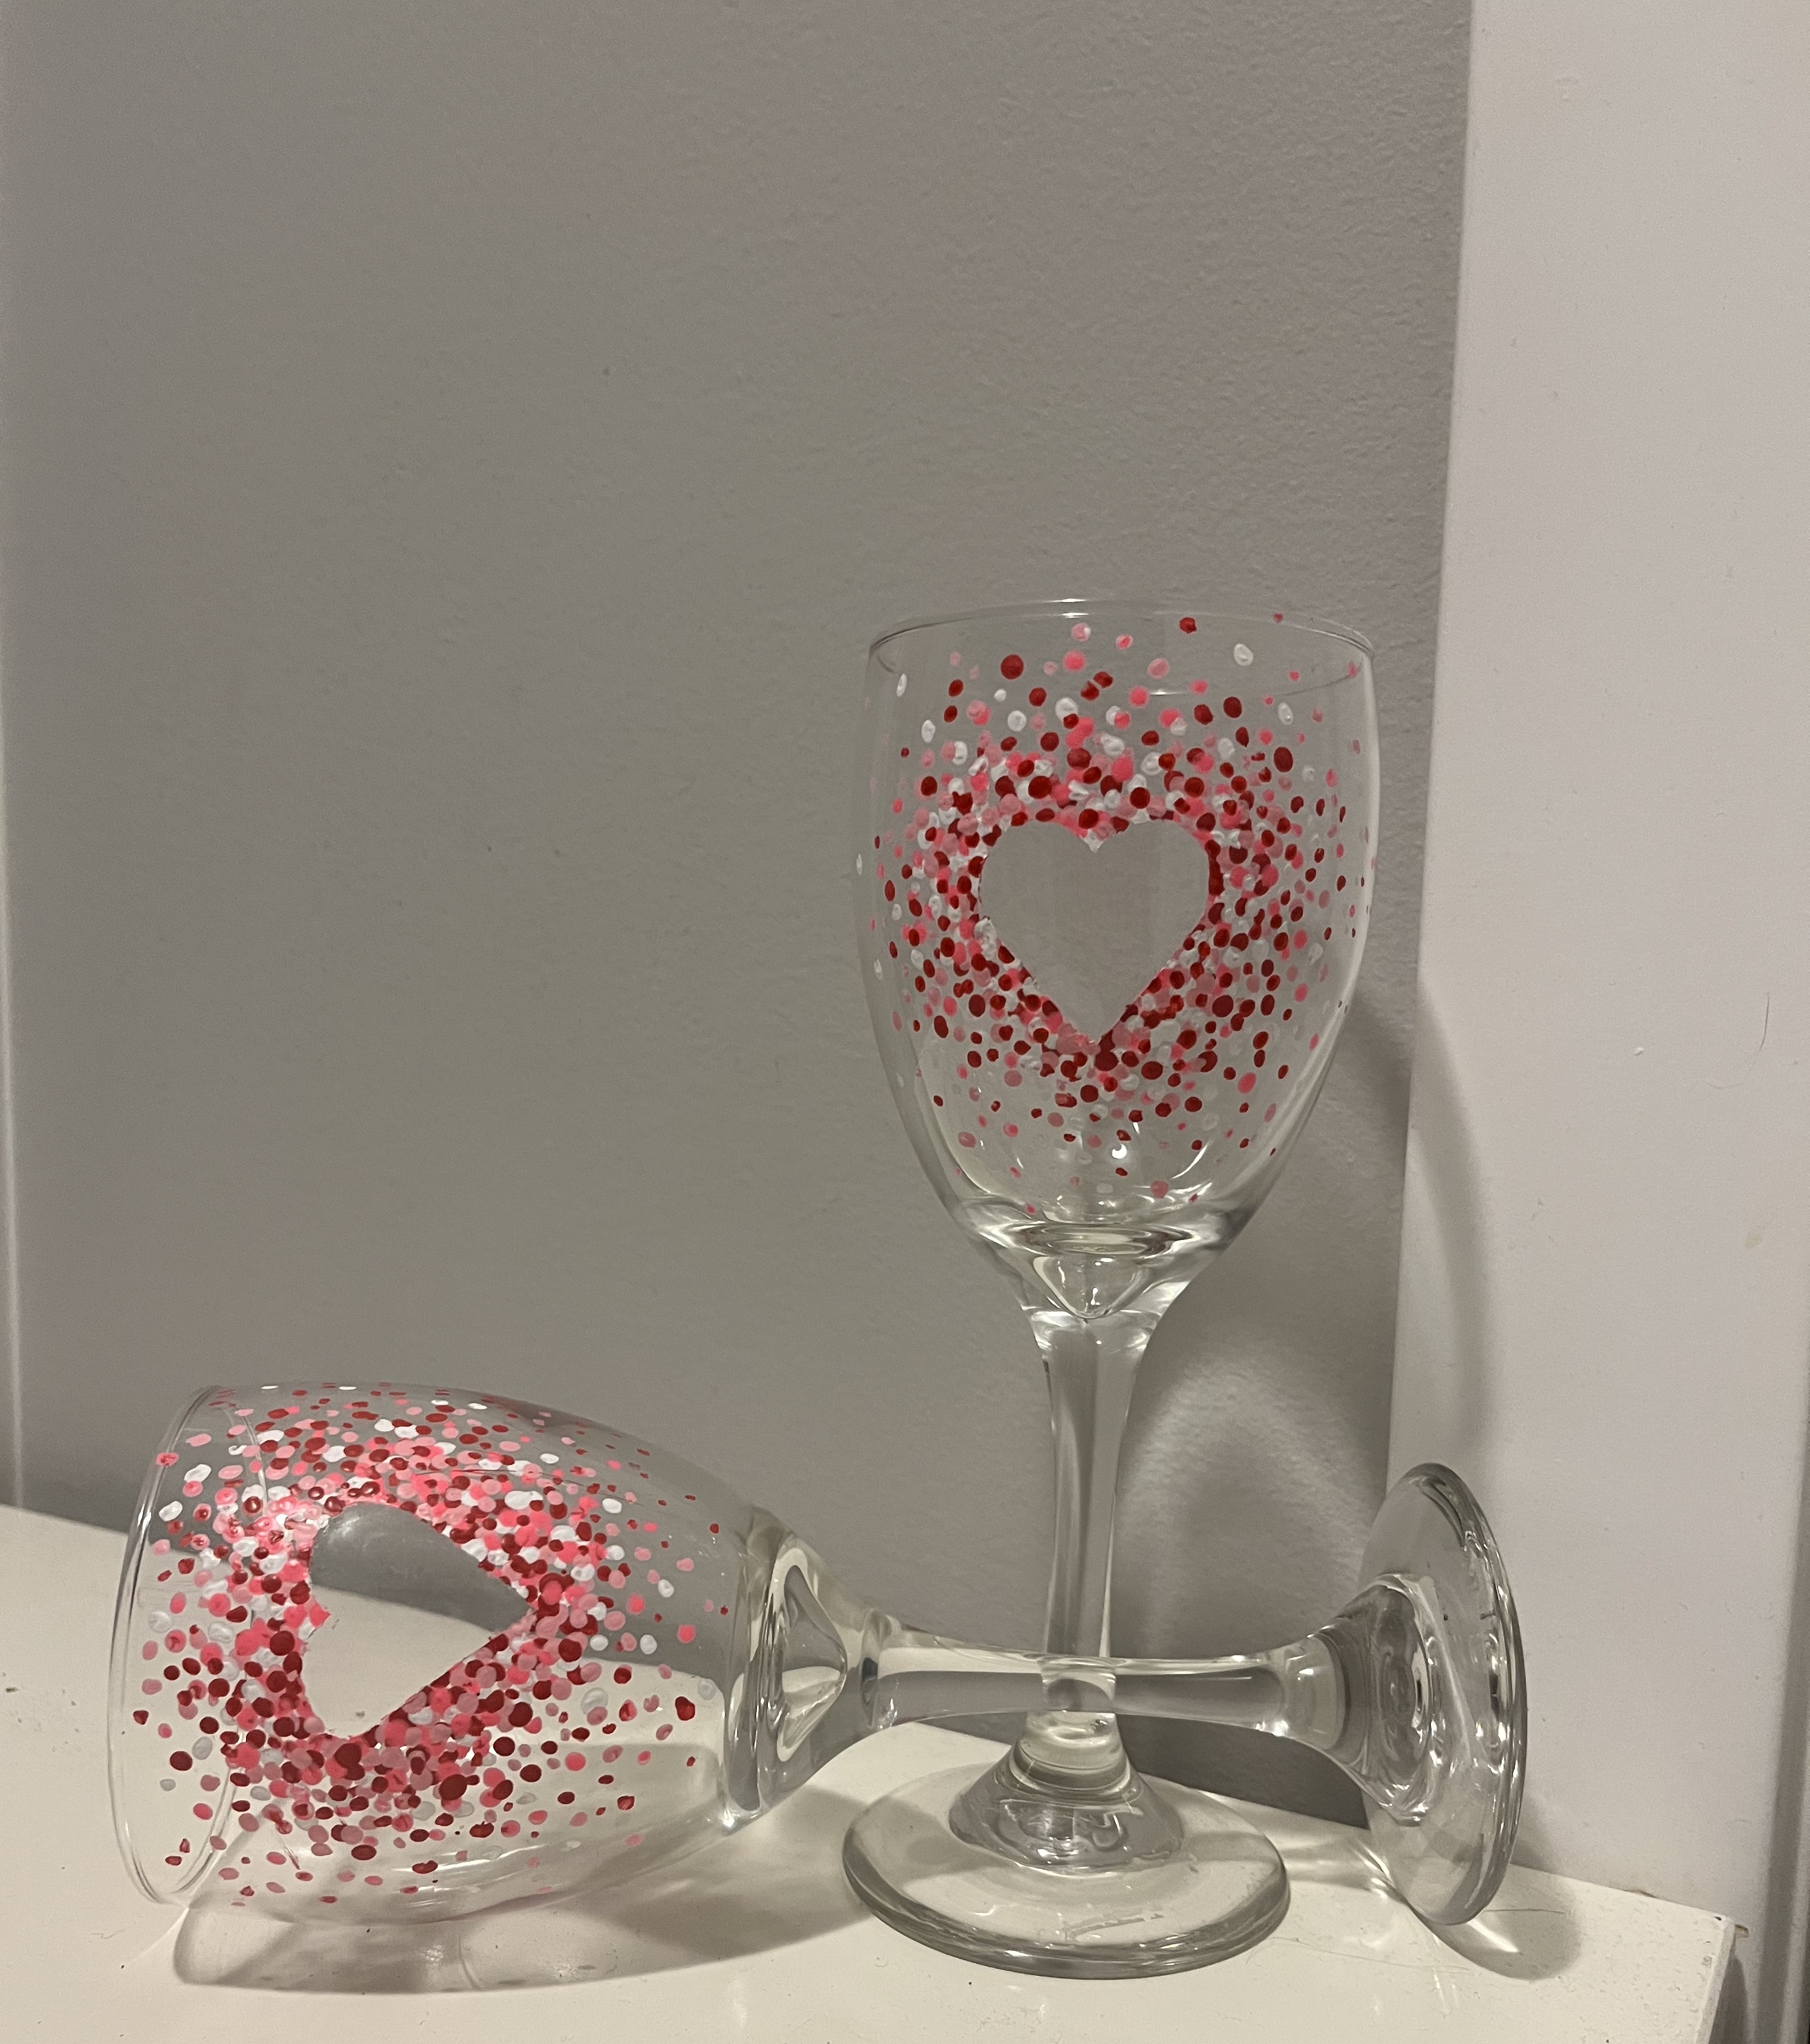 A Valentines Day wine glasses experience project by Yaymaker